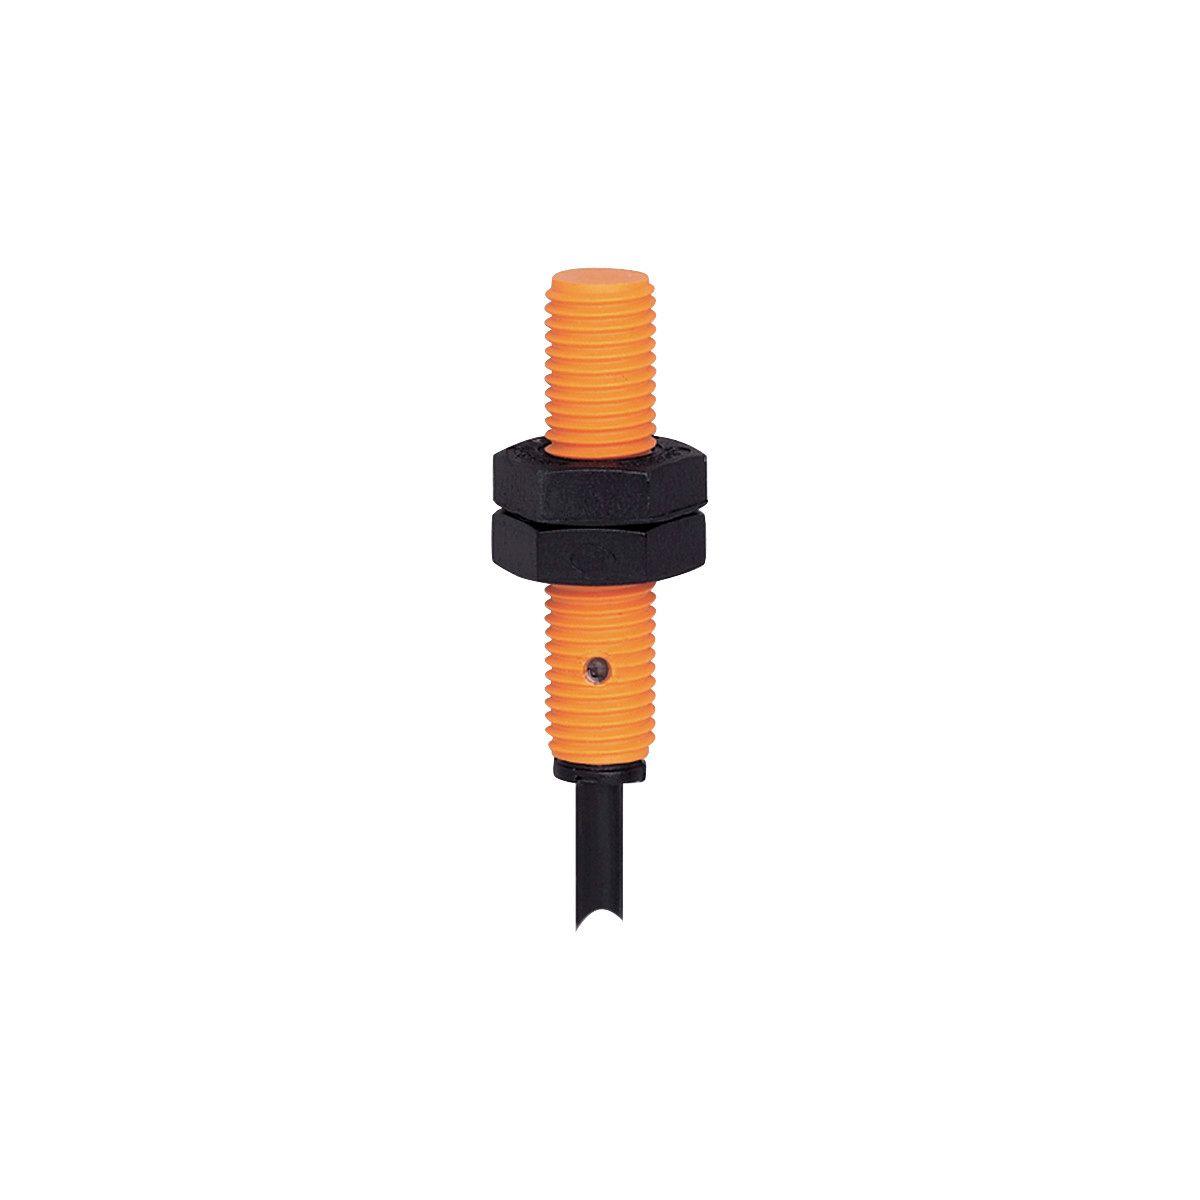 ifm Electronic IE5099 Inductive sensor, Particularly short housing, Electrical design: PNP, Output function: normally open, Sensing range [mm]: 2, Housing: Threaded type, Dimensions [mm]: M8 x 1 / L = 35